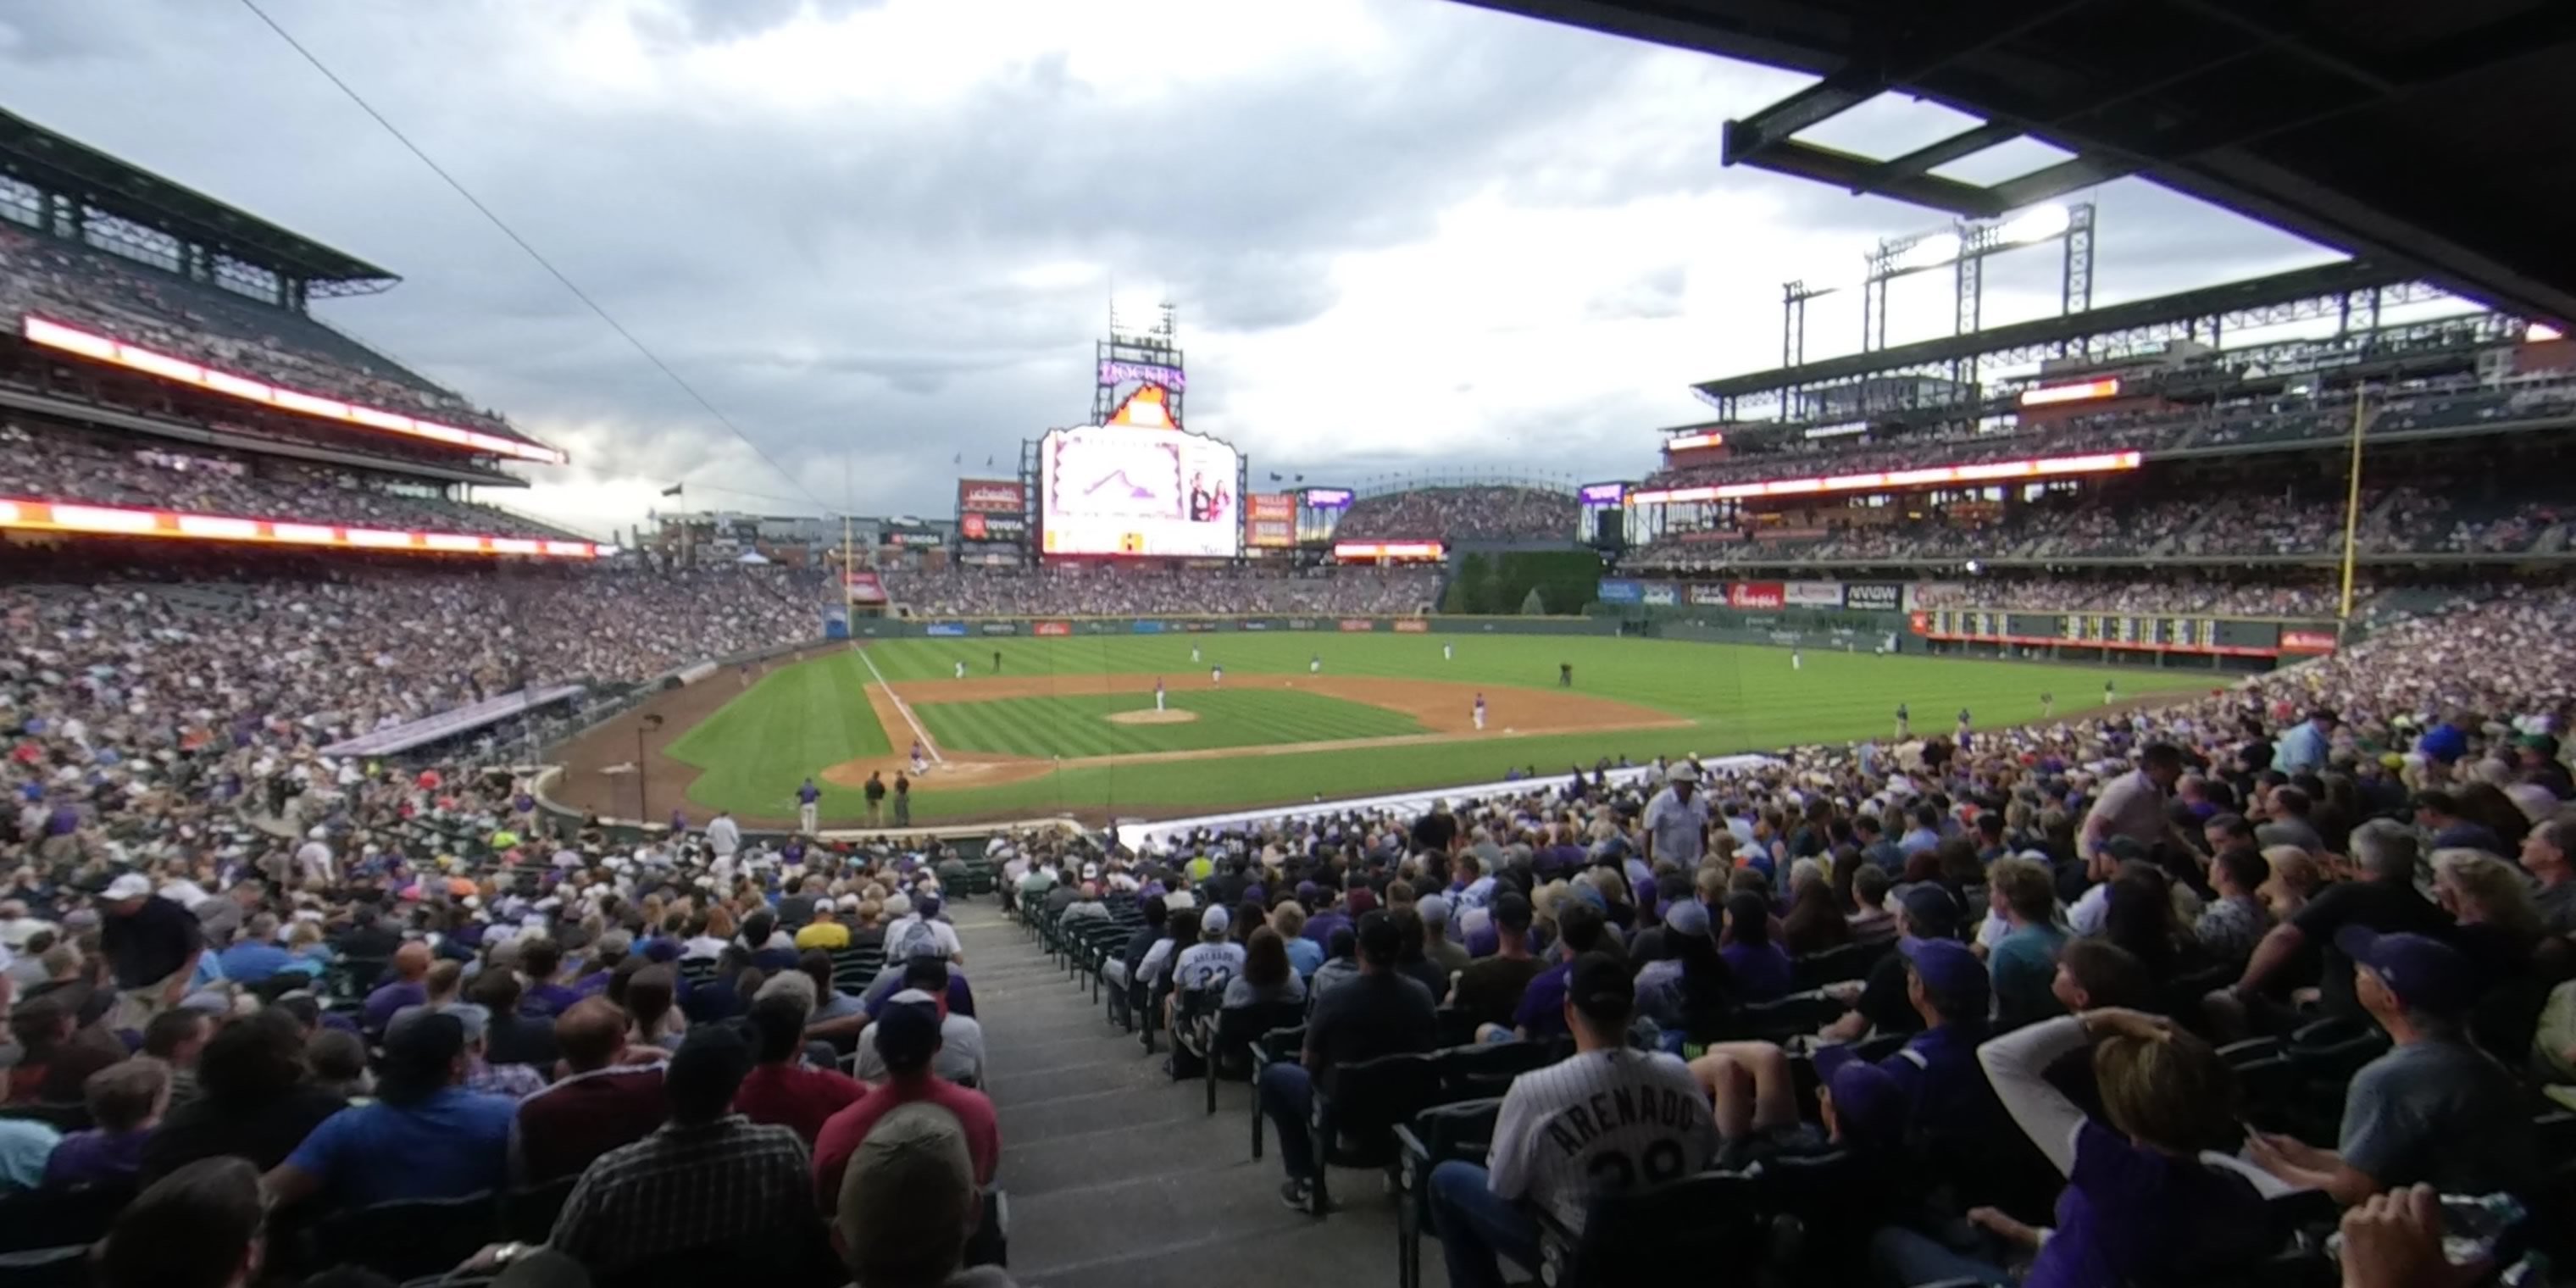 Section 126 At Coors Field Rateyourseats Com